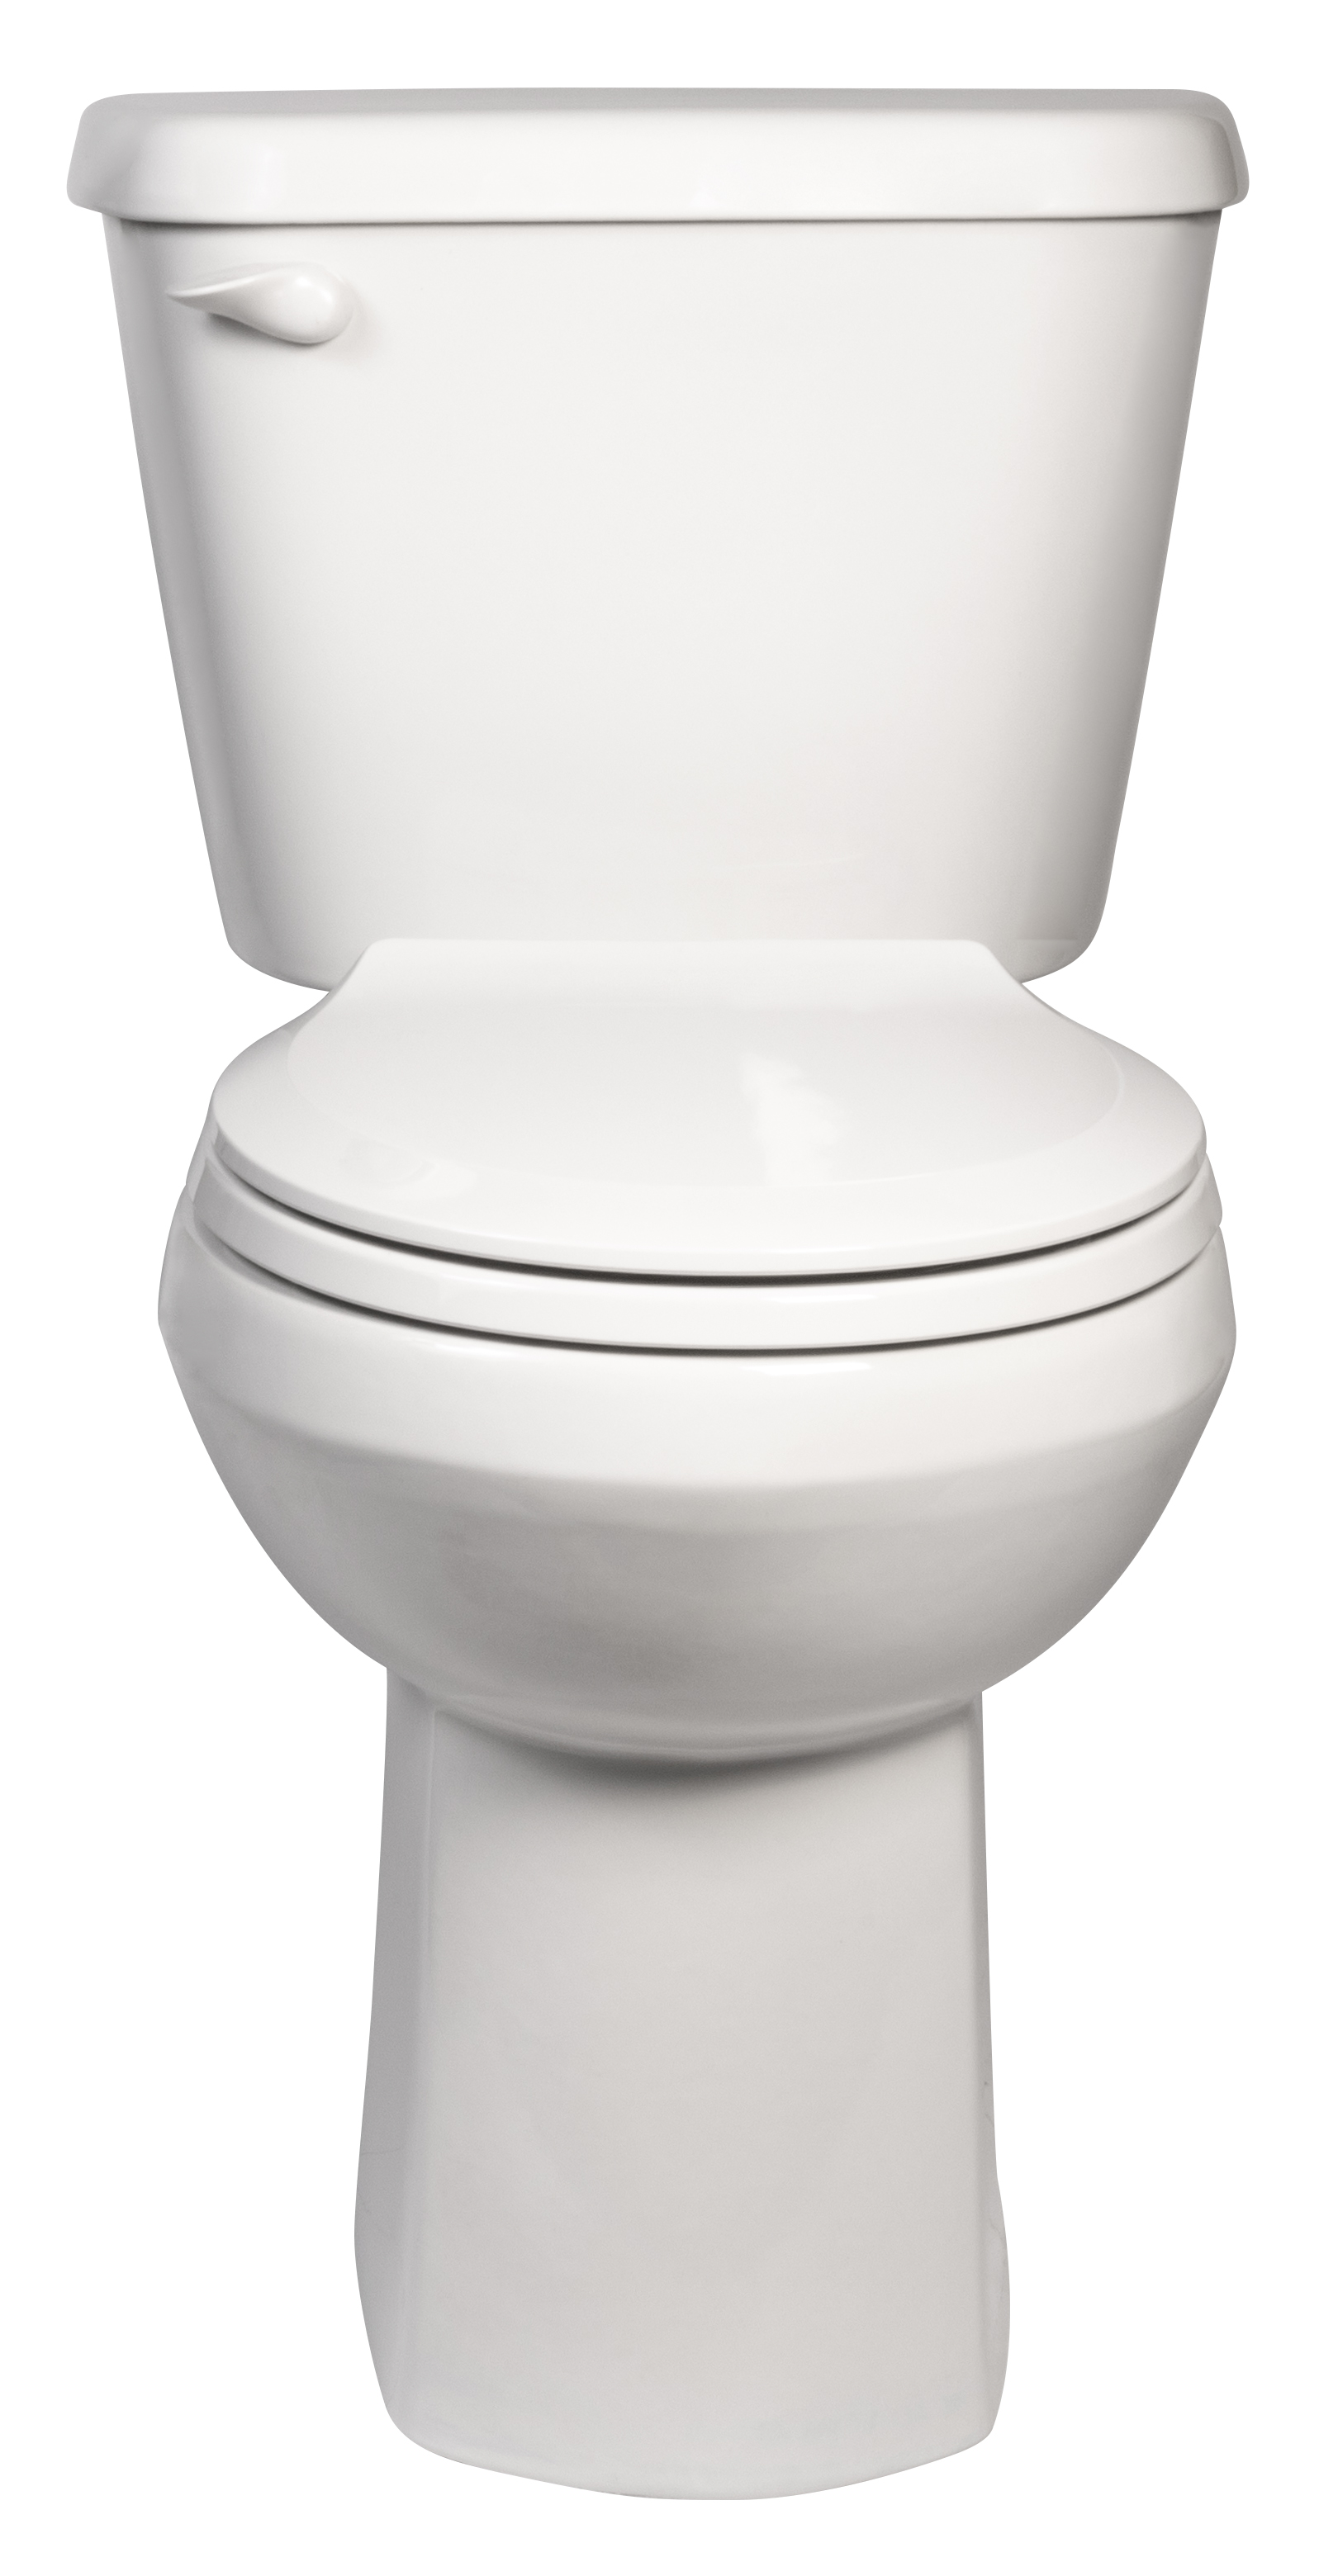 Sonoma Two-Piece 1.28 gpf/4.8 Lpf Chair Height Round Front Complete Toilet With Seat and Lined Tank